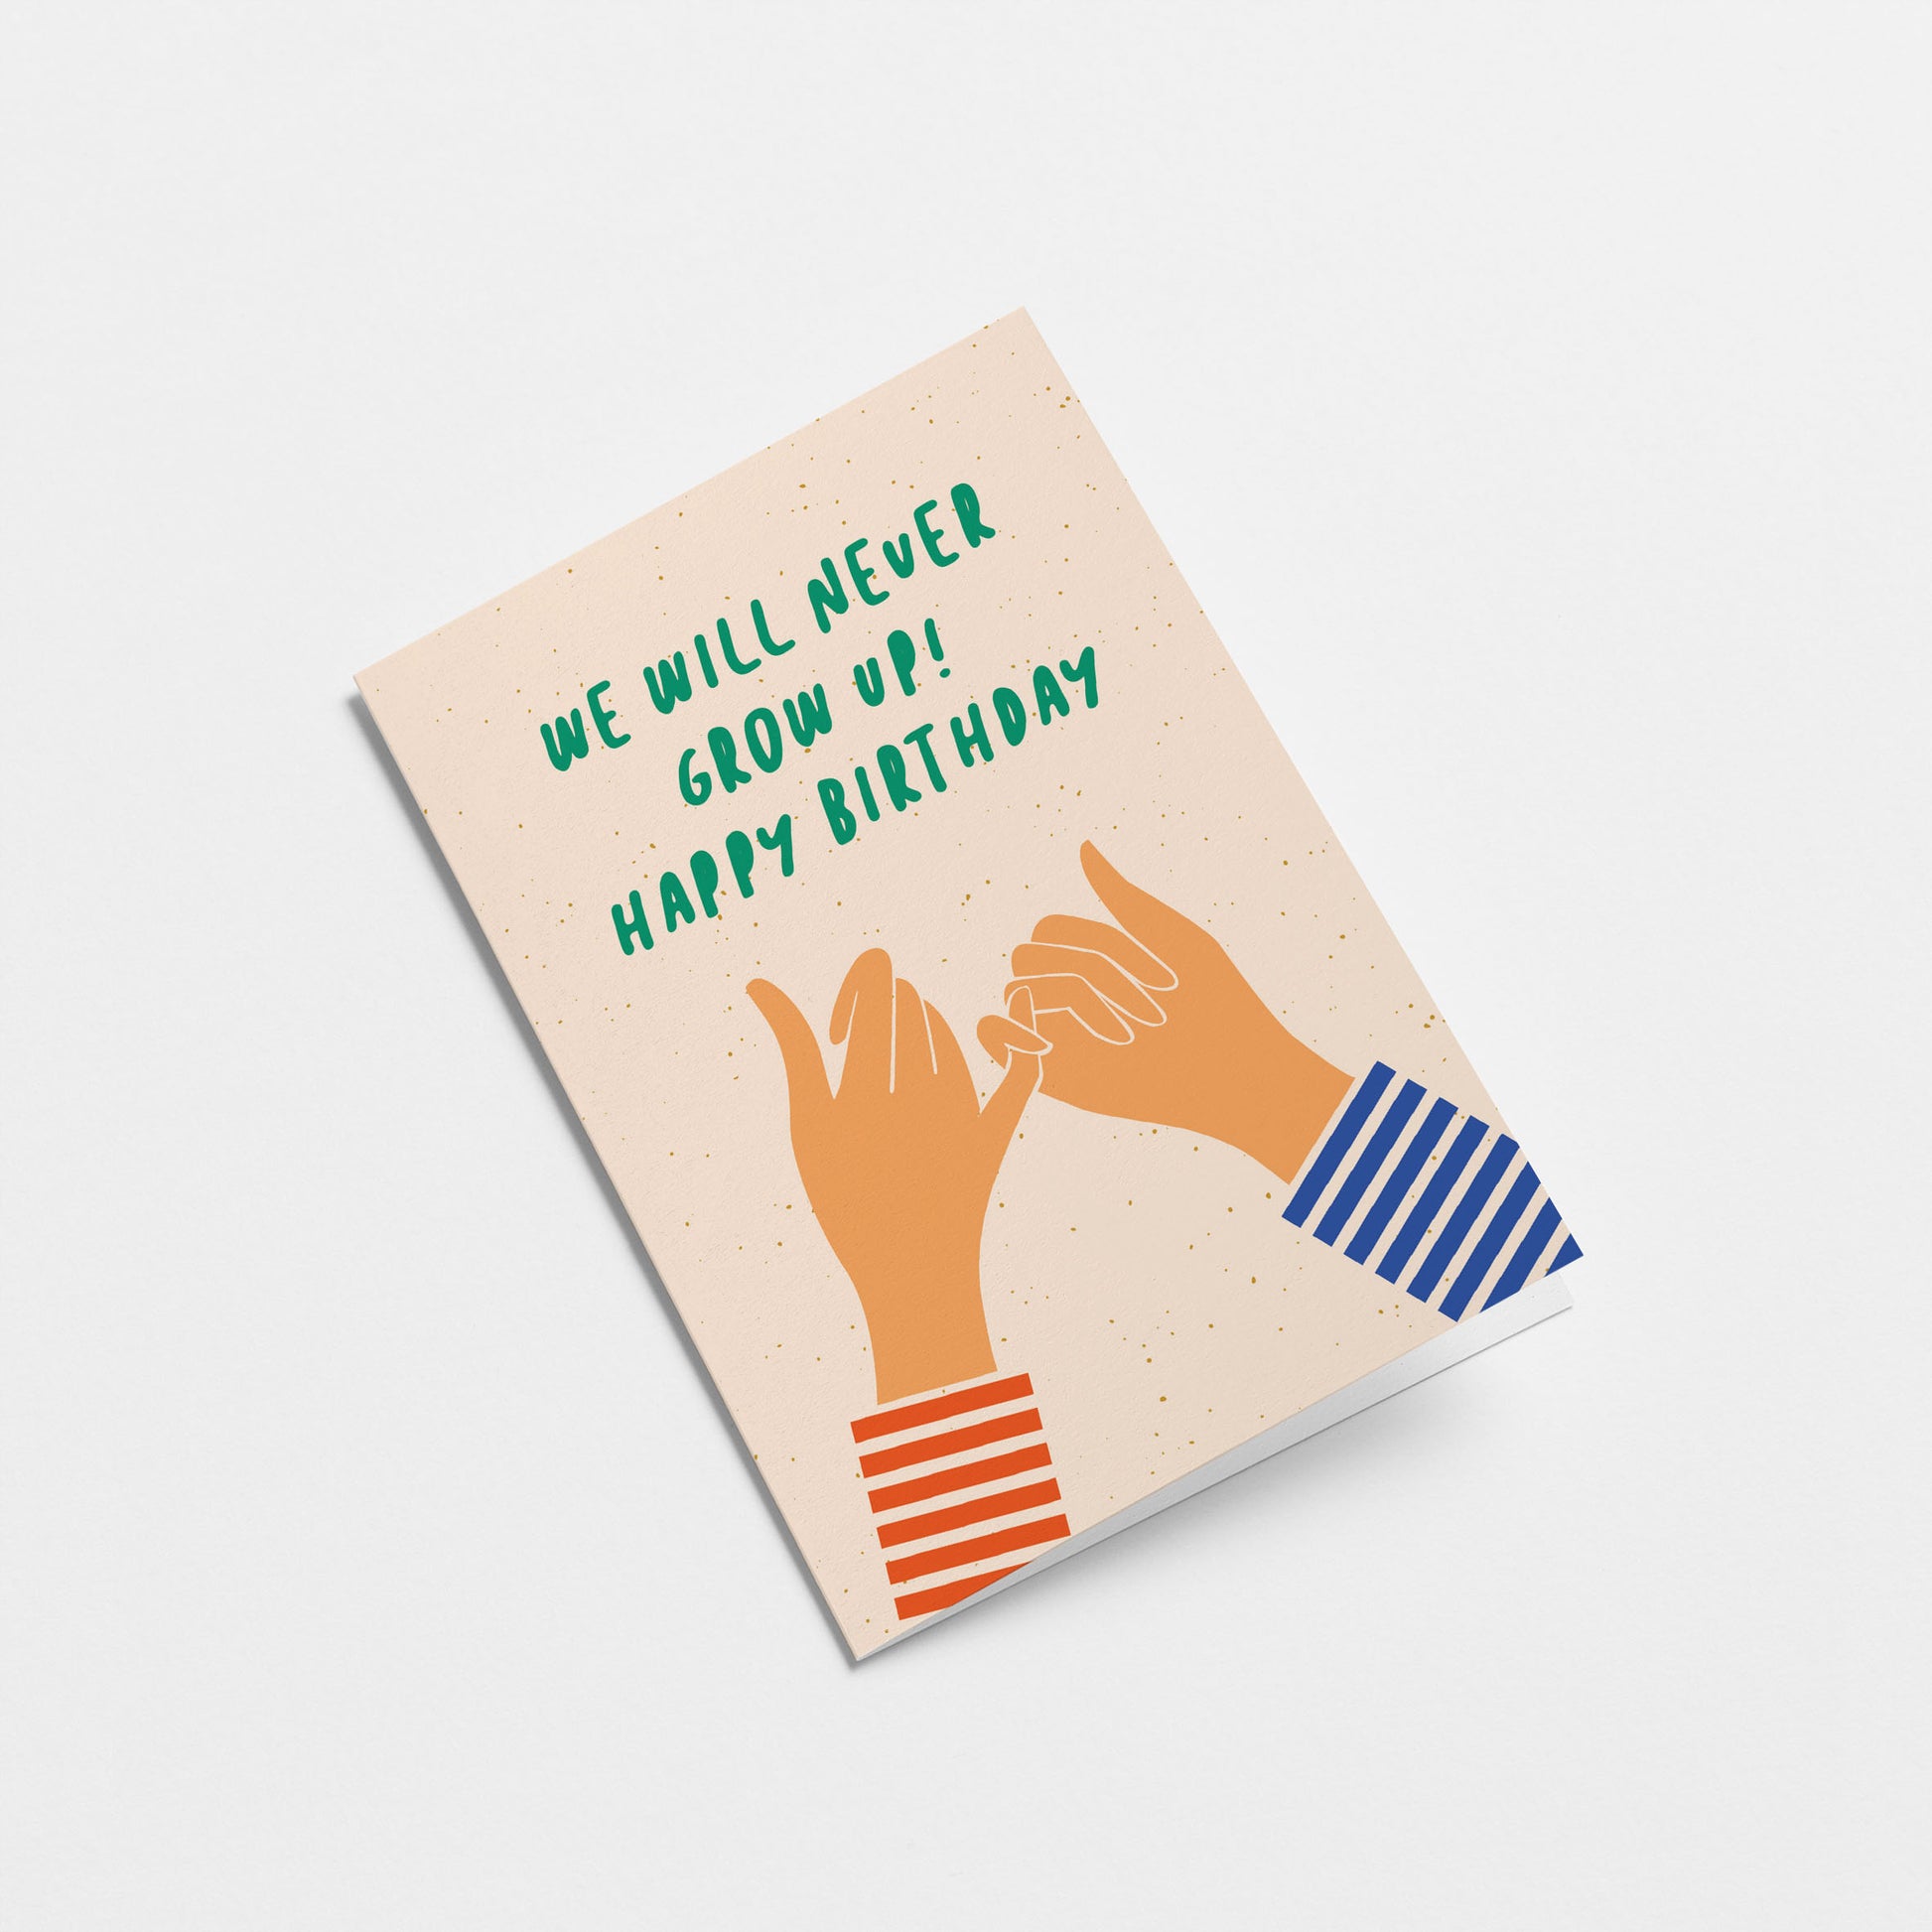 We Will Never Grow Up! - Happy Birthday Greetings Card